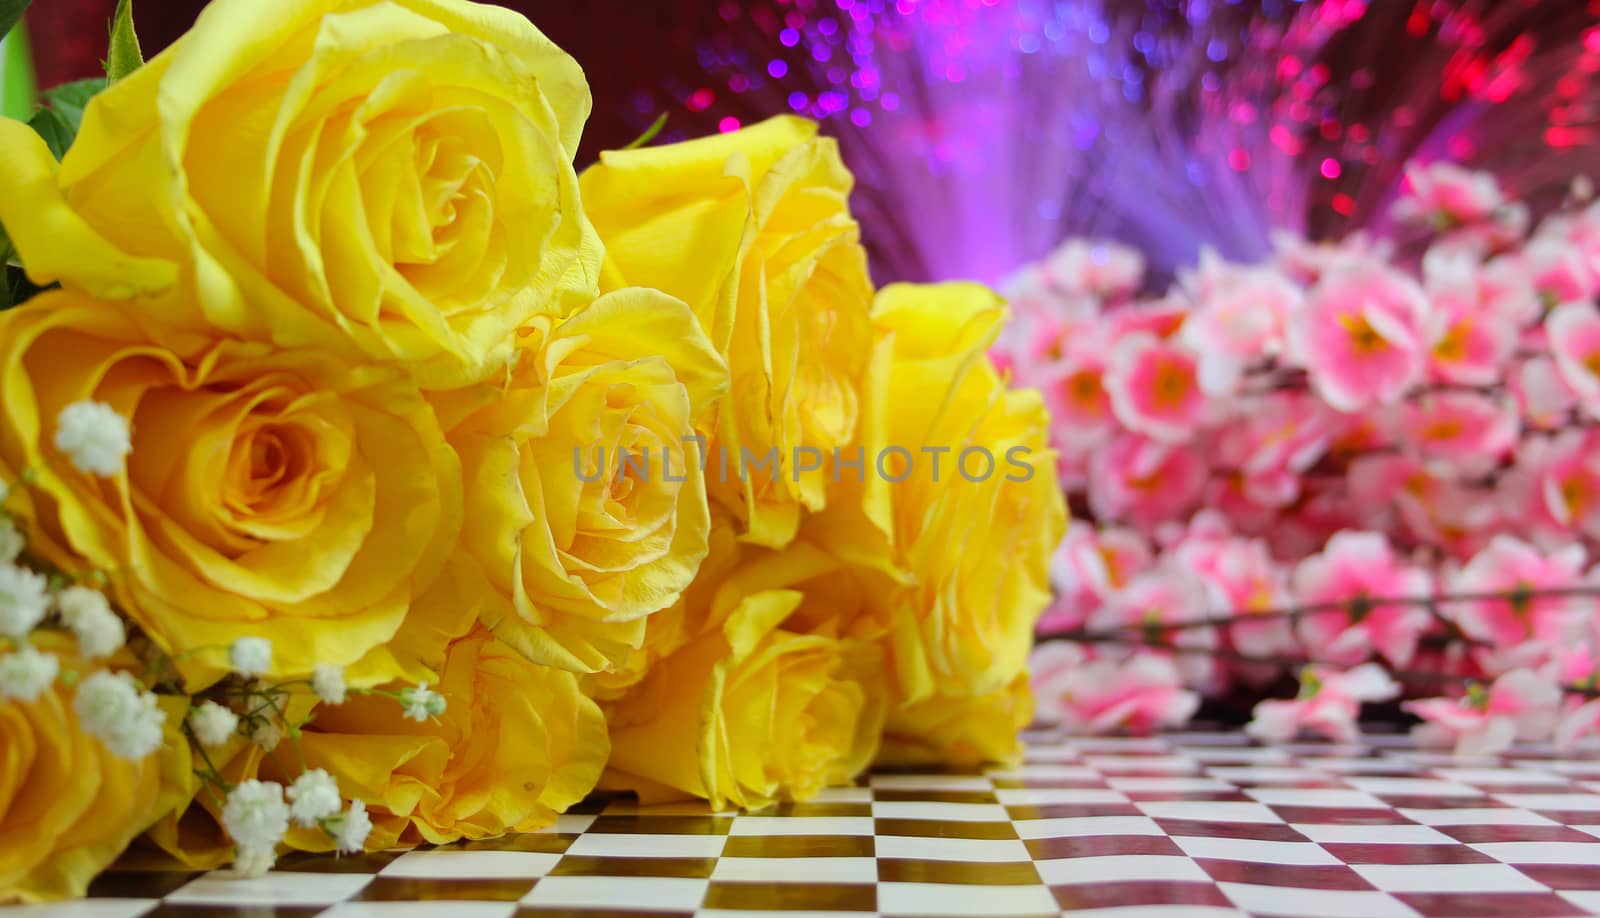 Yellow Roses With Pink flowers and lights in background